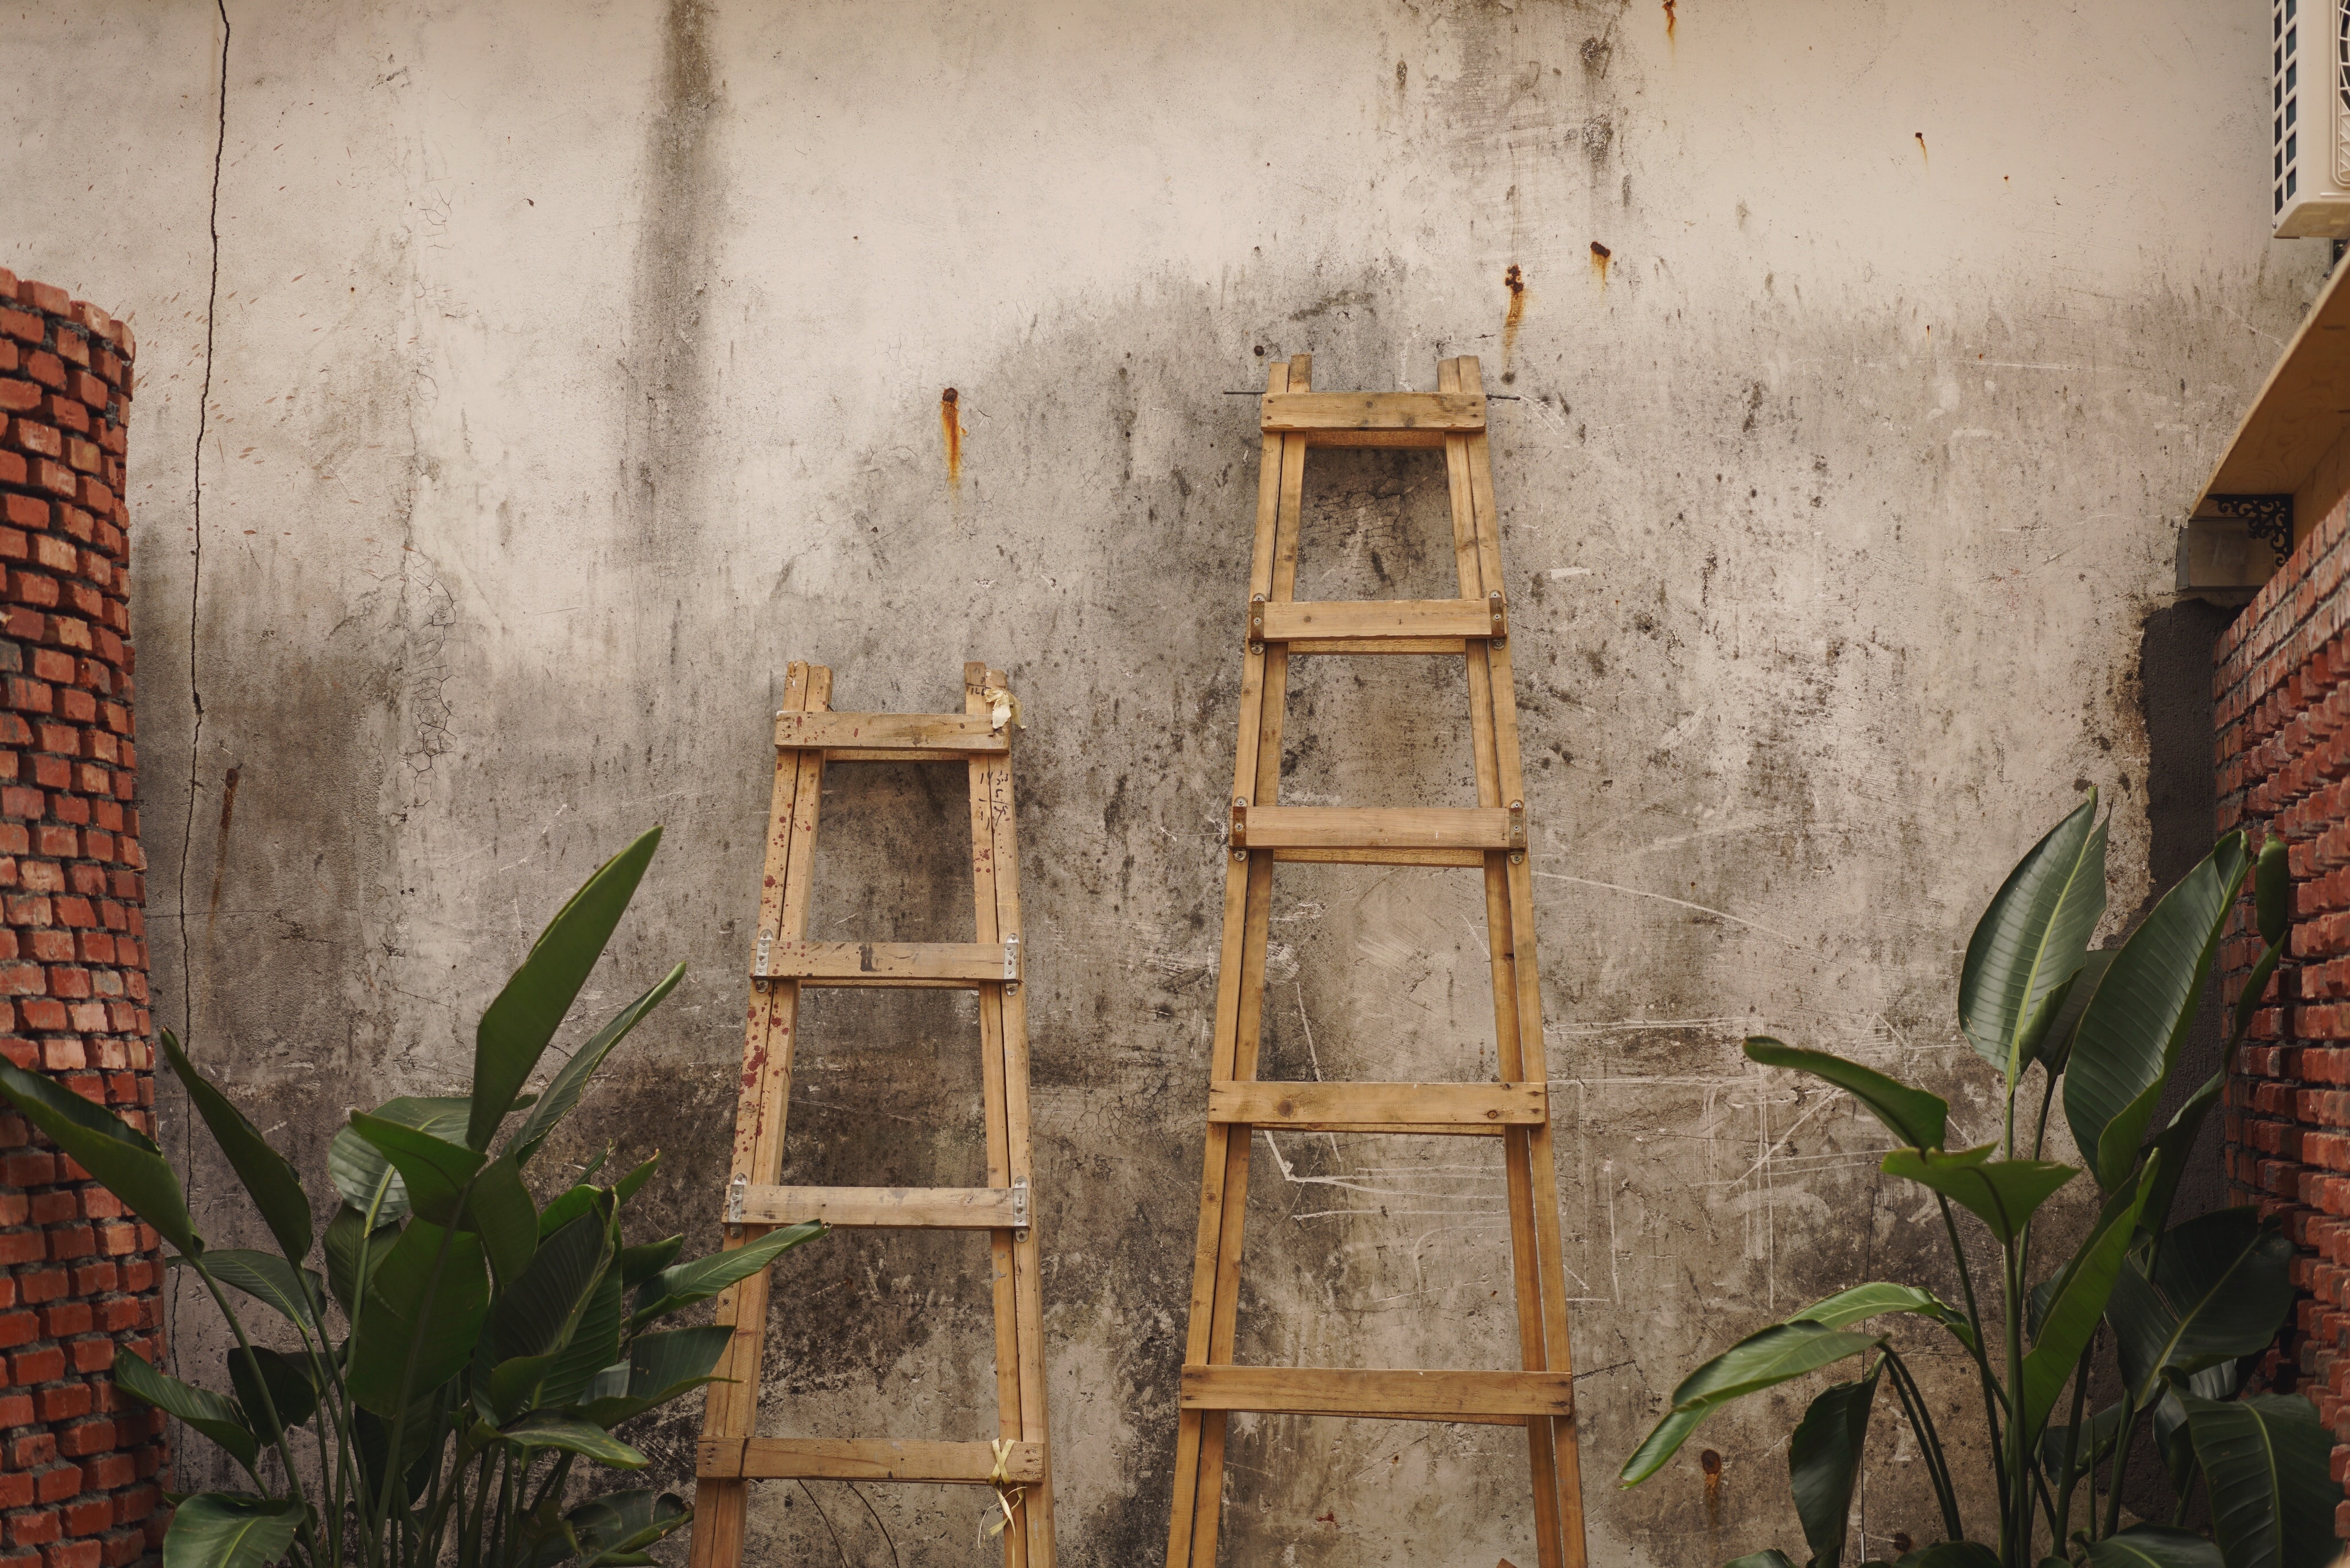 Image of two wooden ladders